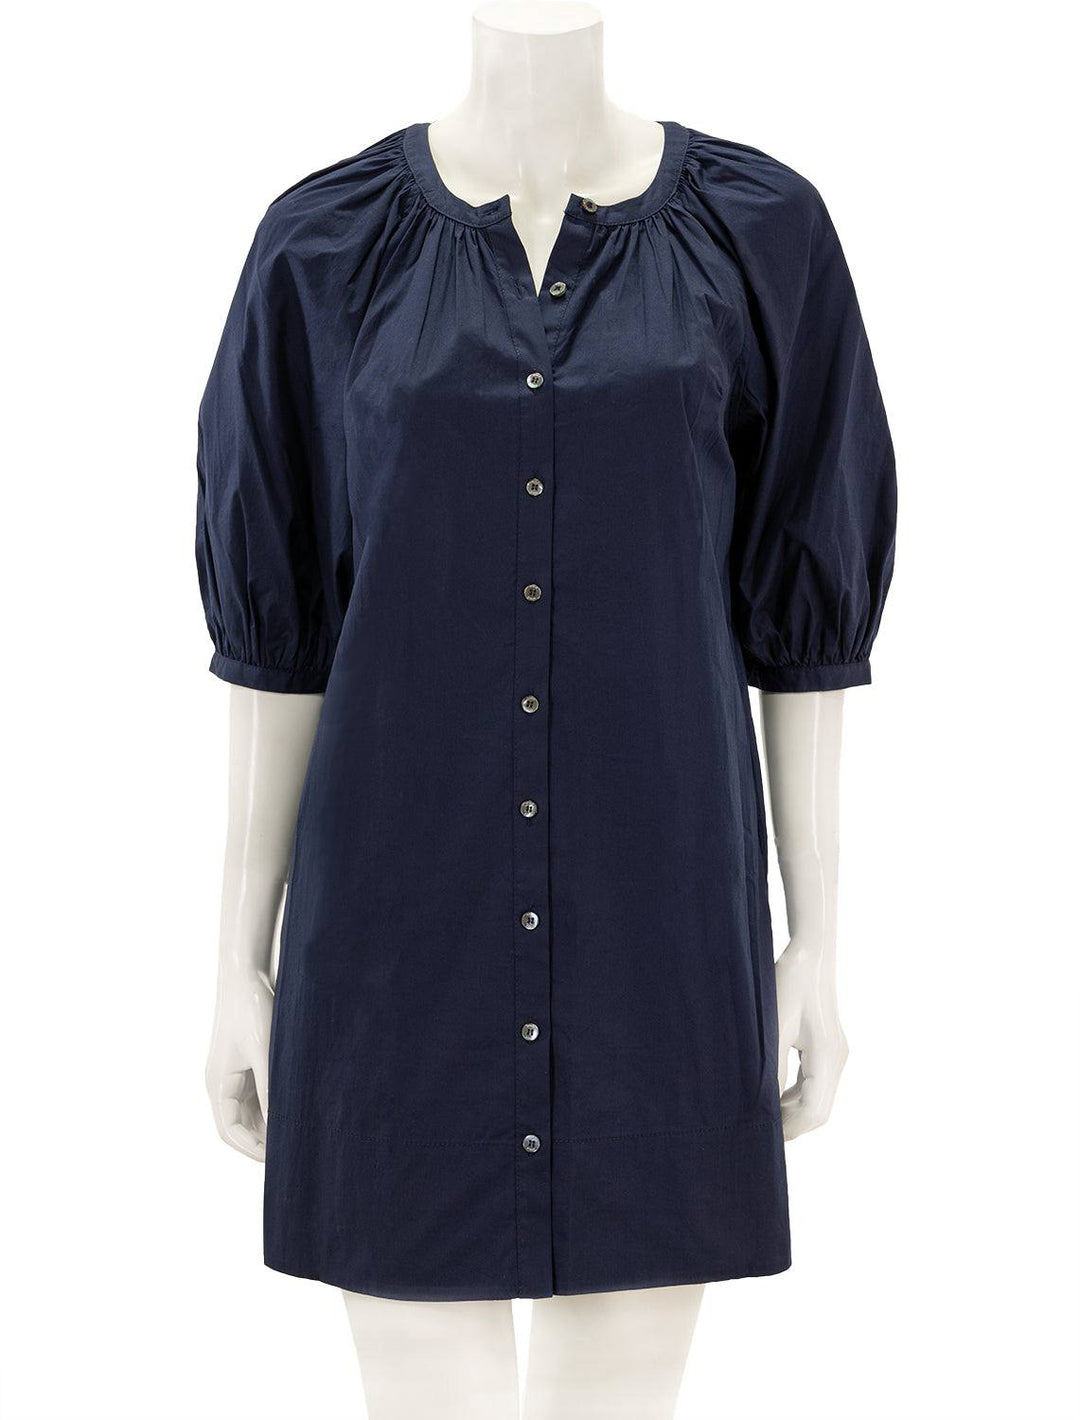 Front view of STAUD's mini vincent dress in navy.